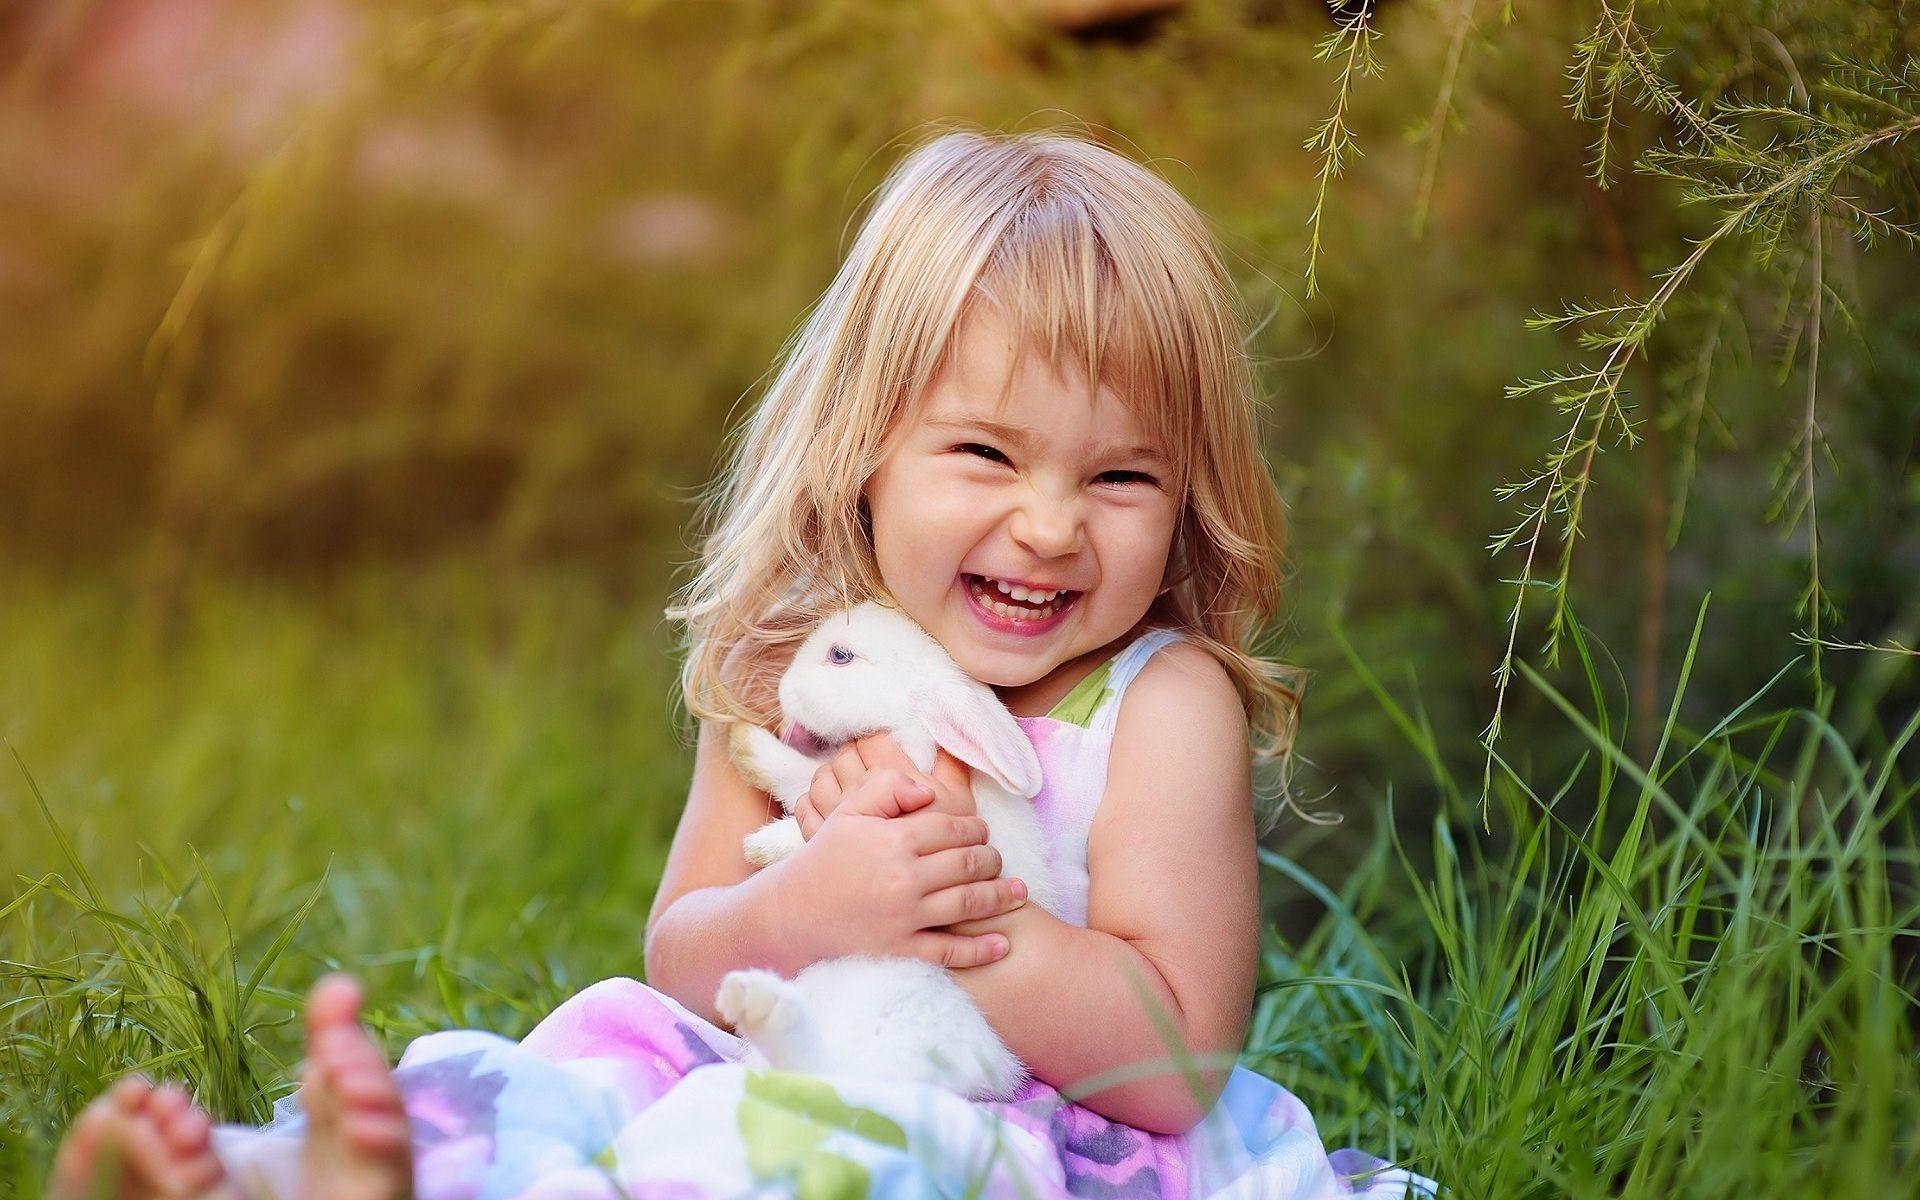 Cute Smiling Child Girl With Rabbit Wallpaper Series. Laughing baby, Cute baby wallpaper, Cute babies